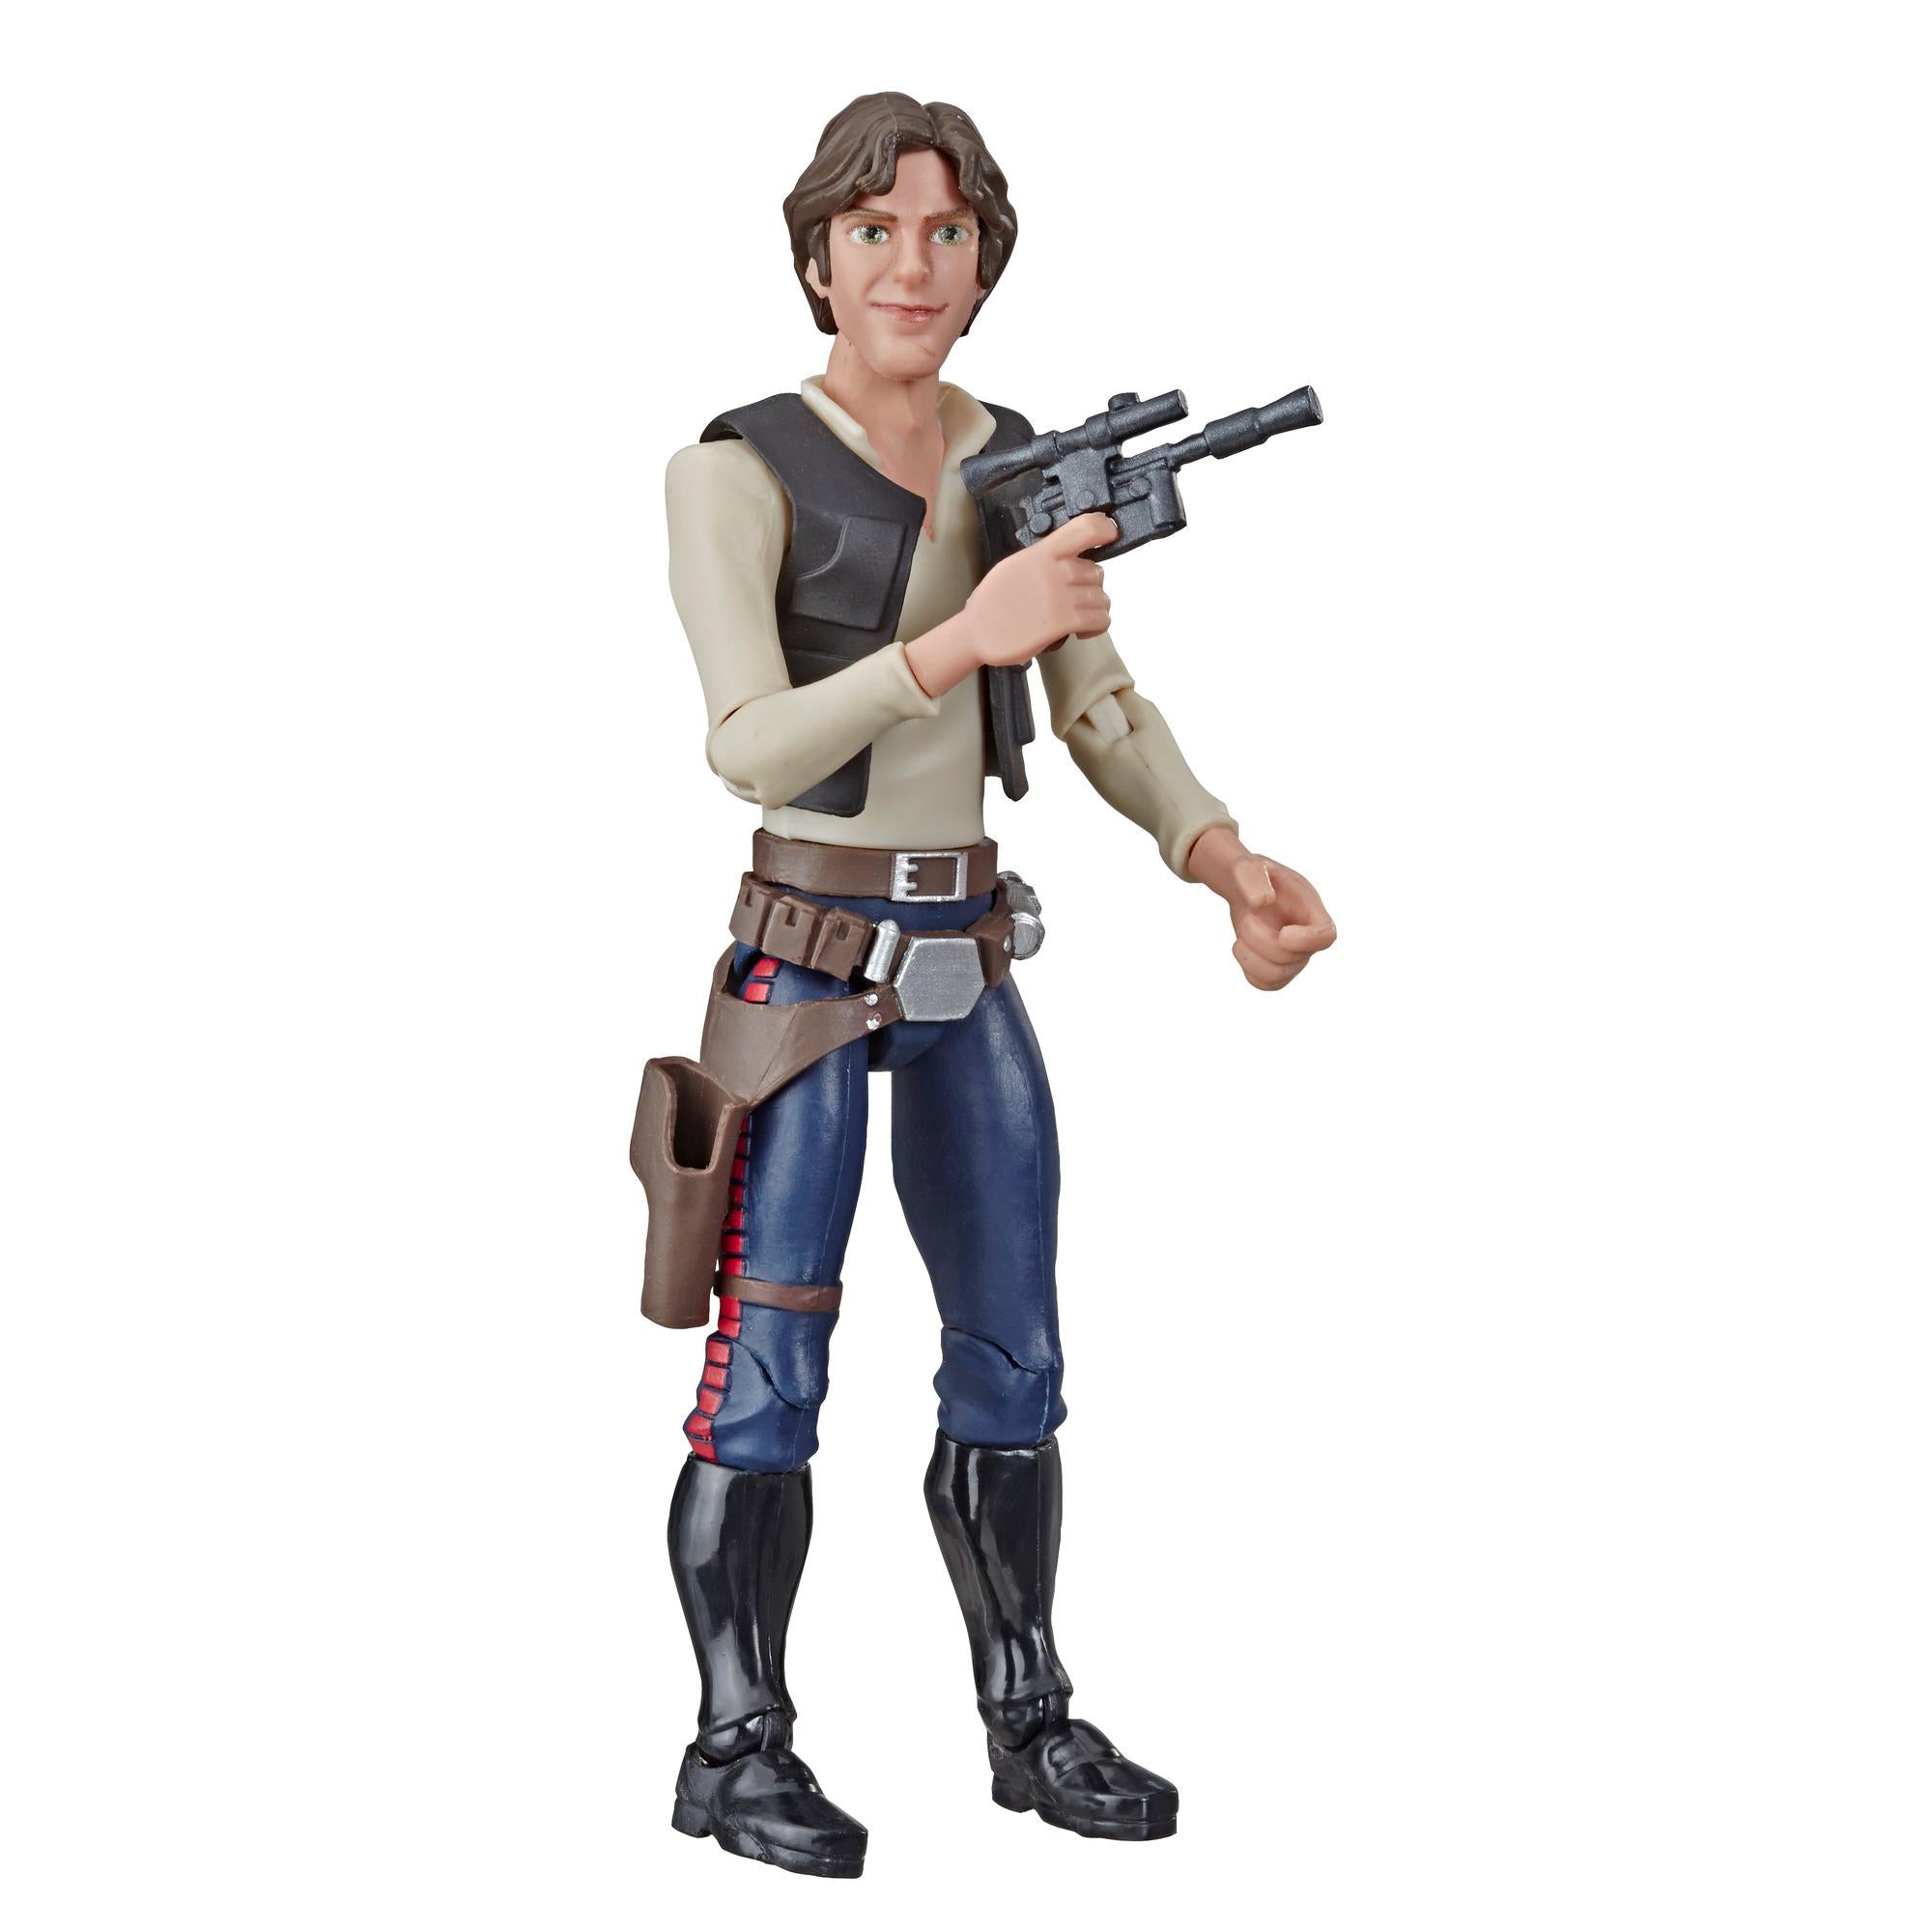 Hasbro Star Wars Galaxy of Adventures The Rise of Skywalker Han Solo 5-Inch-Scale Action Figure Toy